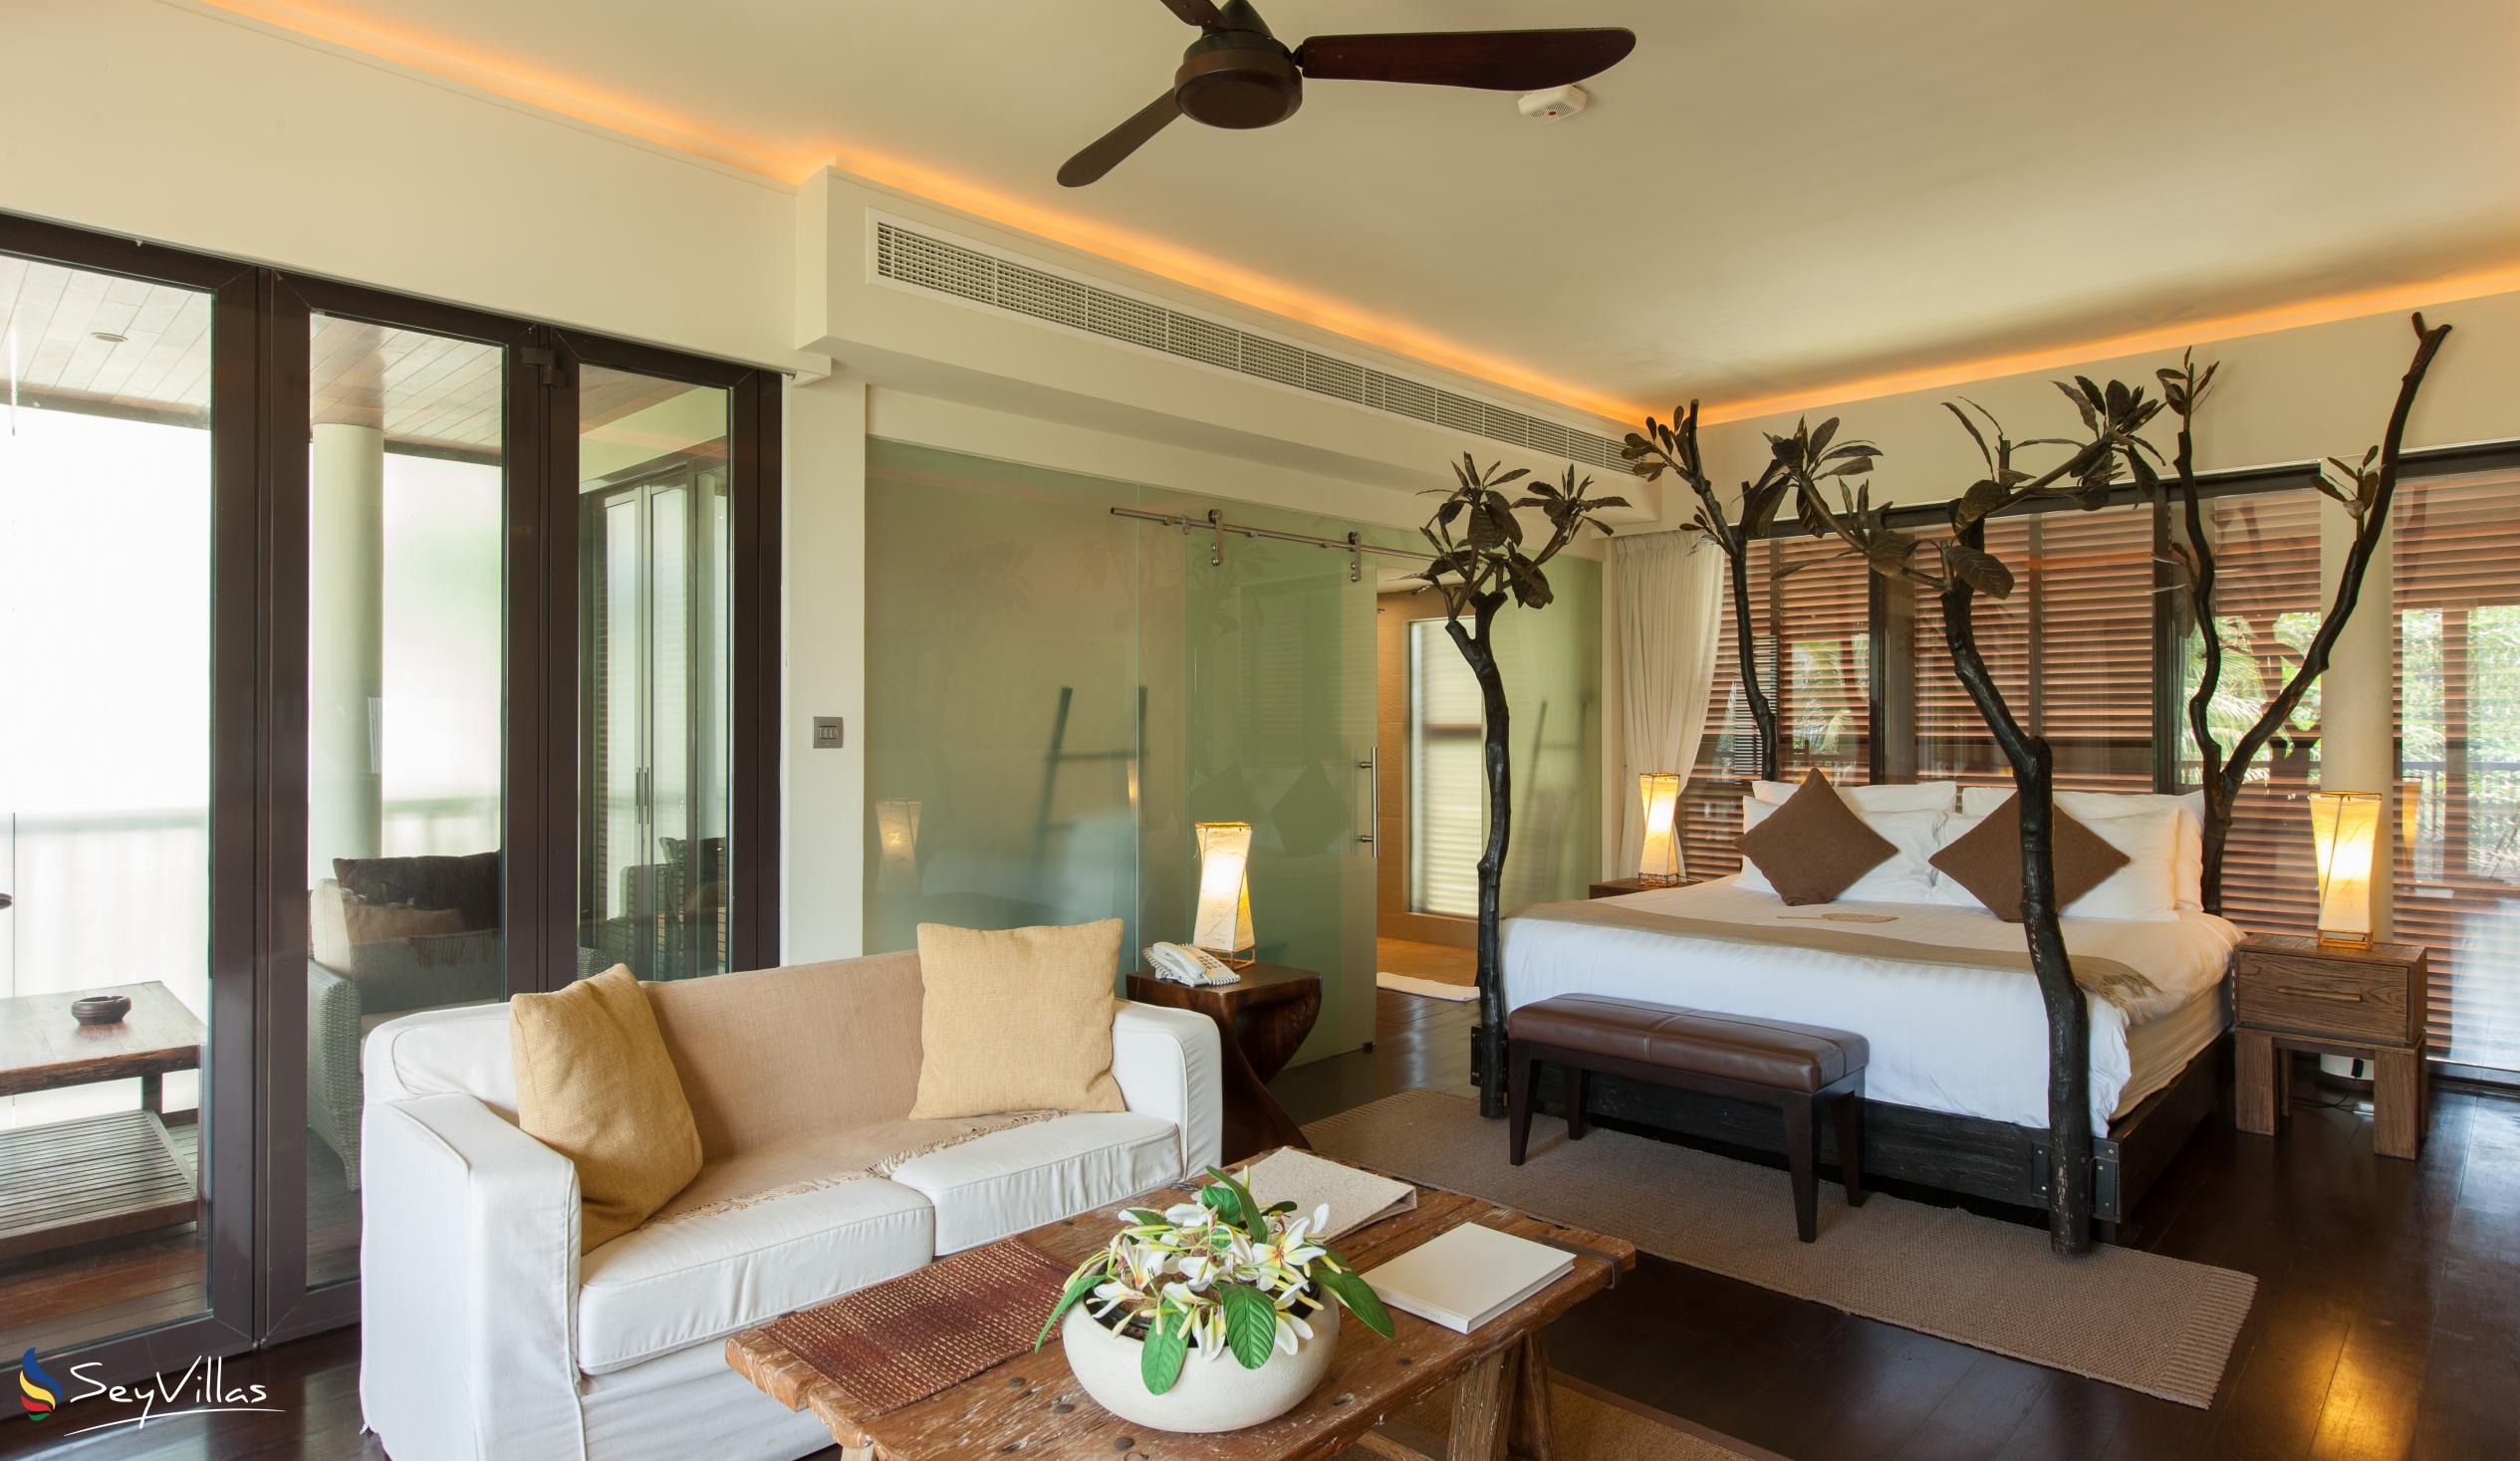 Photo 40: Dhevatara Beach Hotel - Sea View Suite with Kingsize Bed - Praslin (Seychelles)